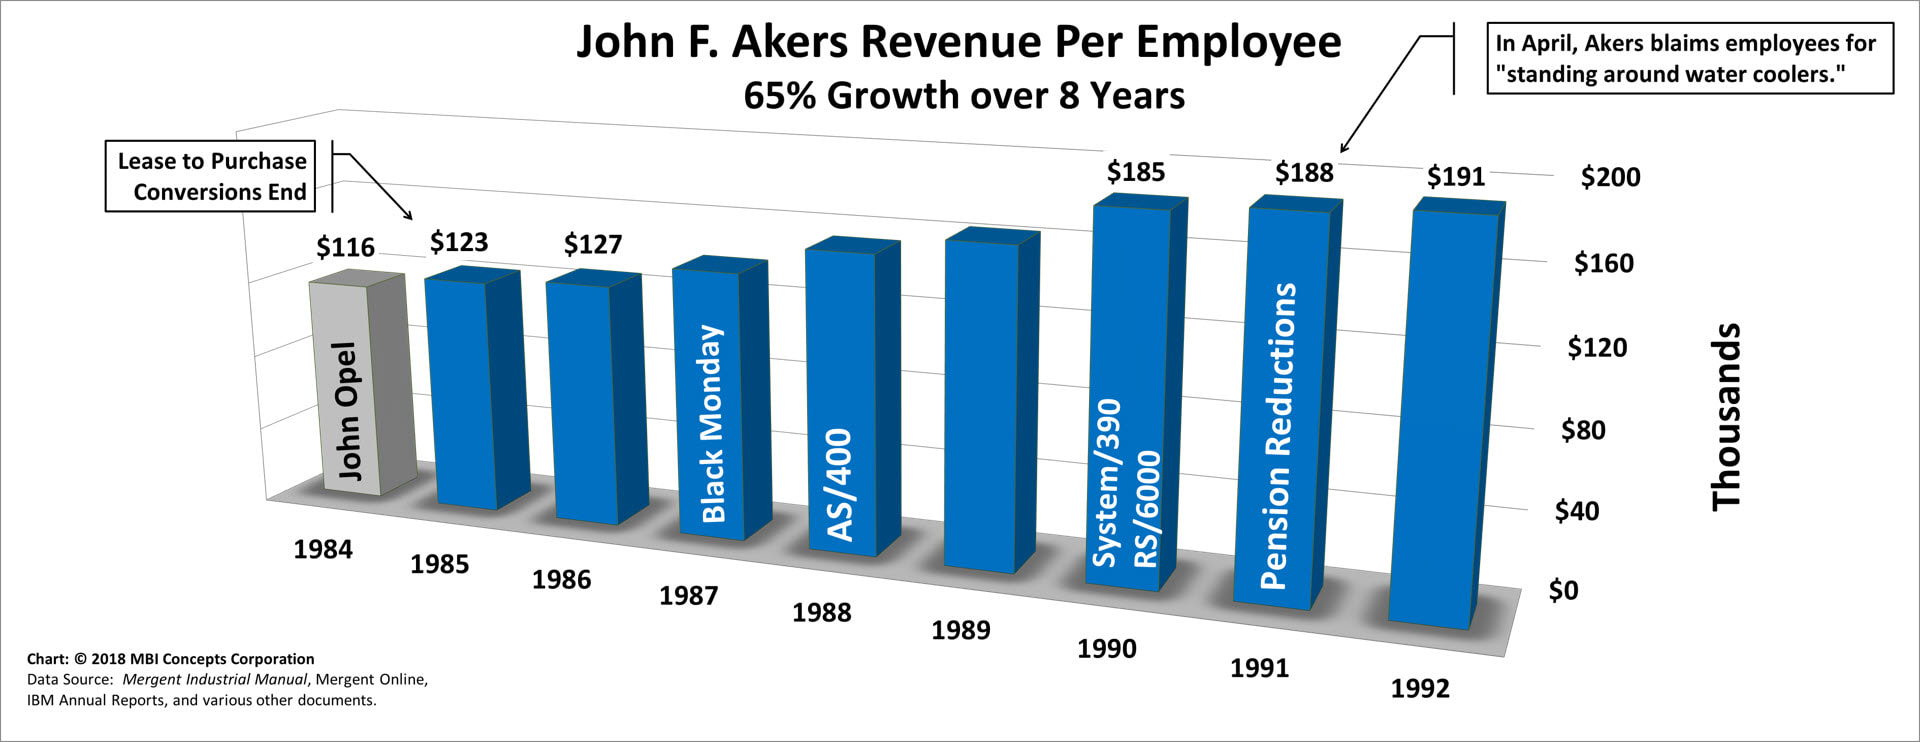 A color bar chart showing IBM's yearly revenue revenue per employee (sales productivity) from 1984 through 1992 for John F. Akers.